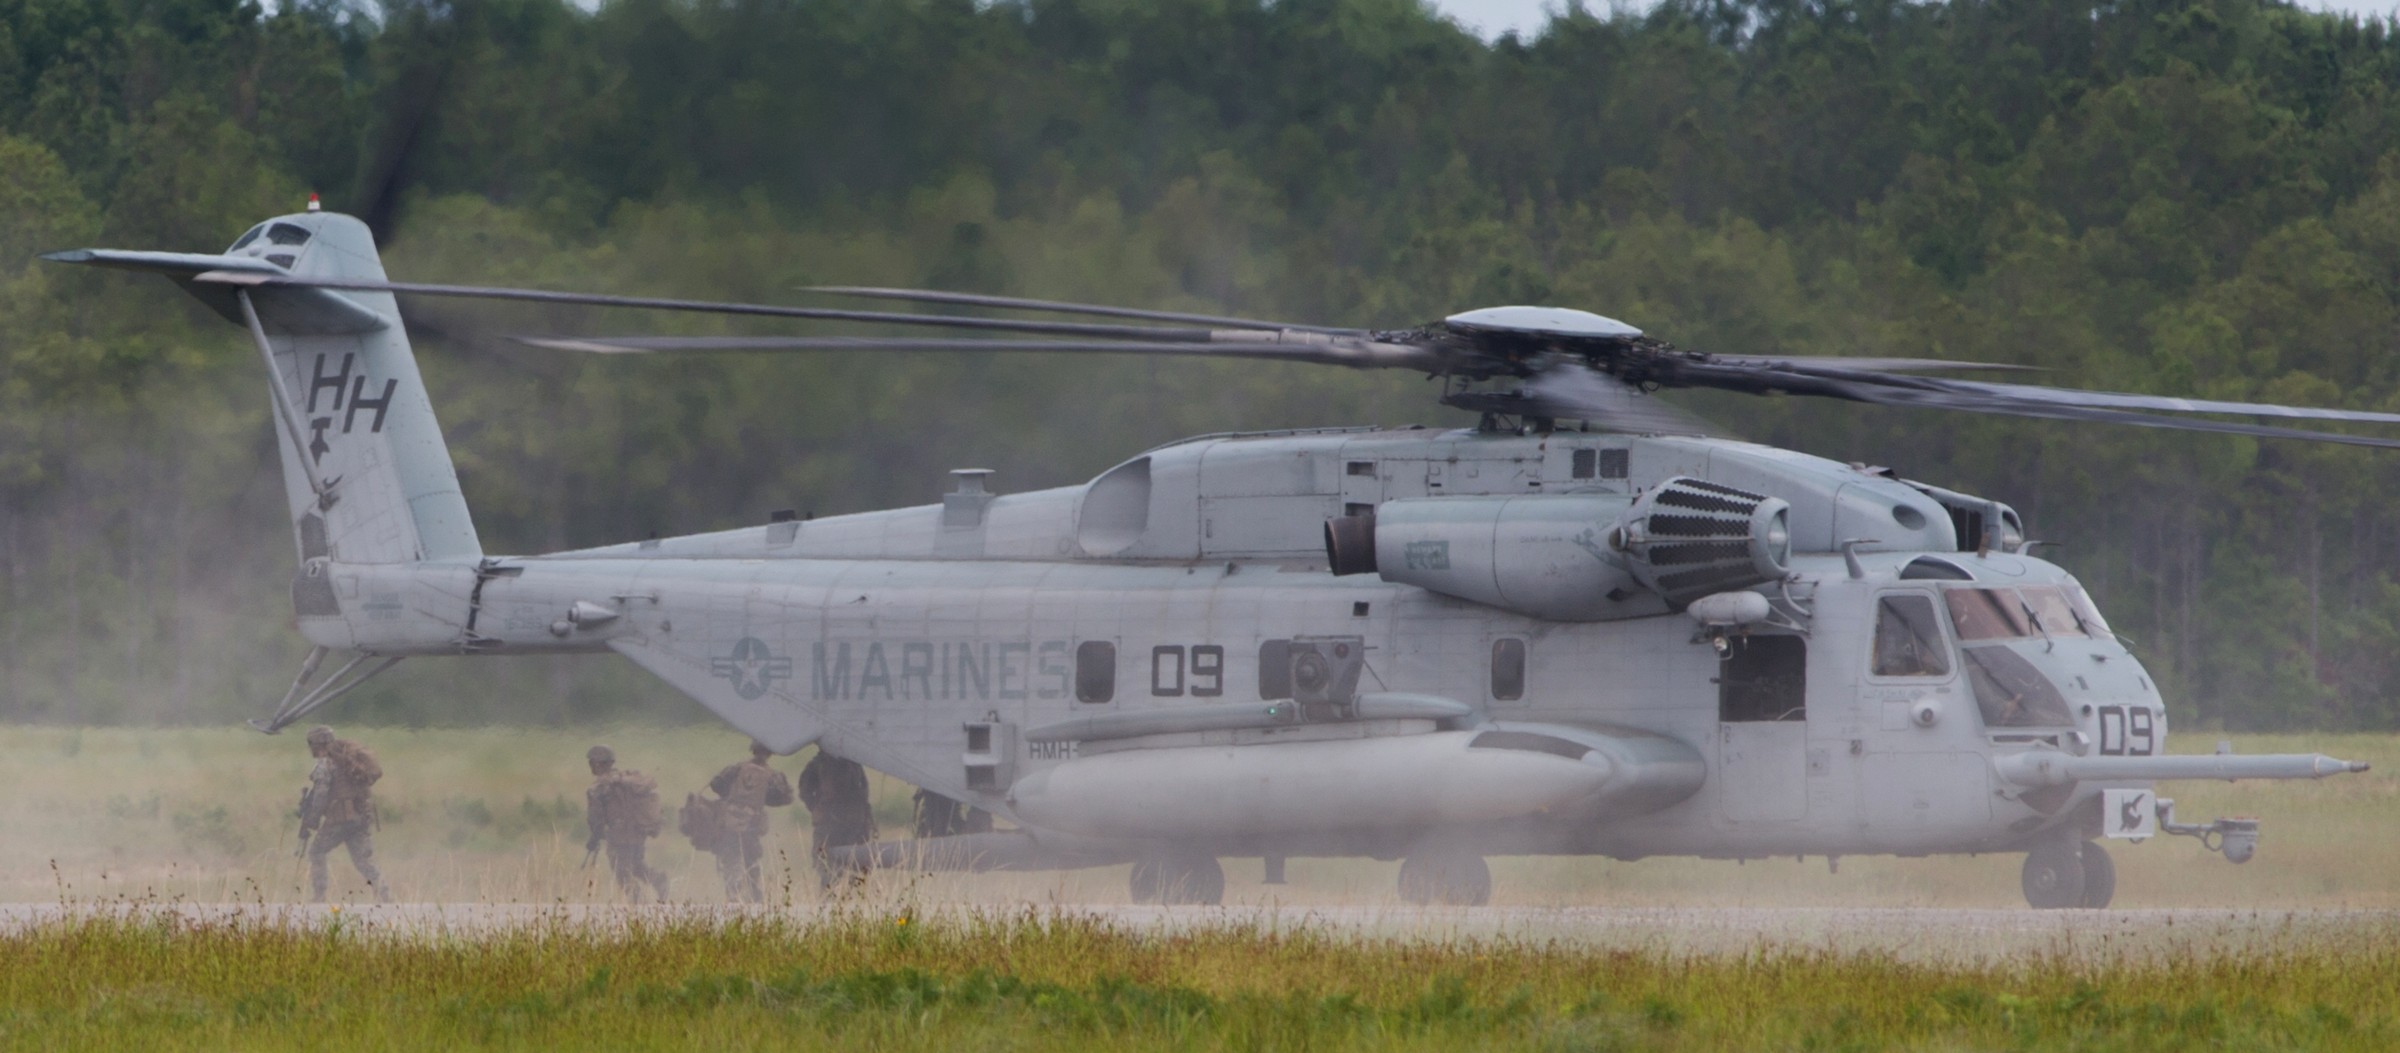 hmh-366 hammerheads marine heavy helicopter squadron usmc sikorsky ch-53e super stallion 89 exercise steel pike